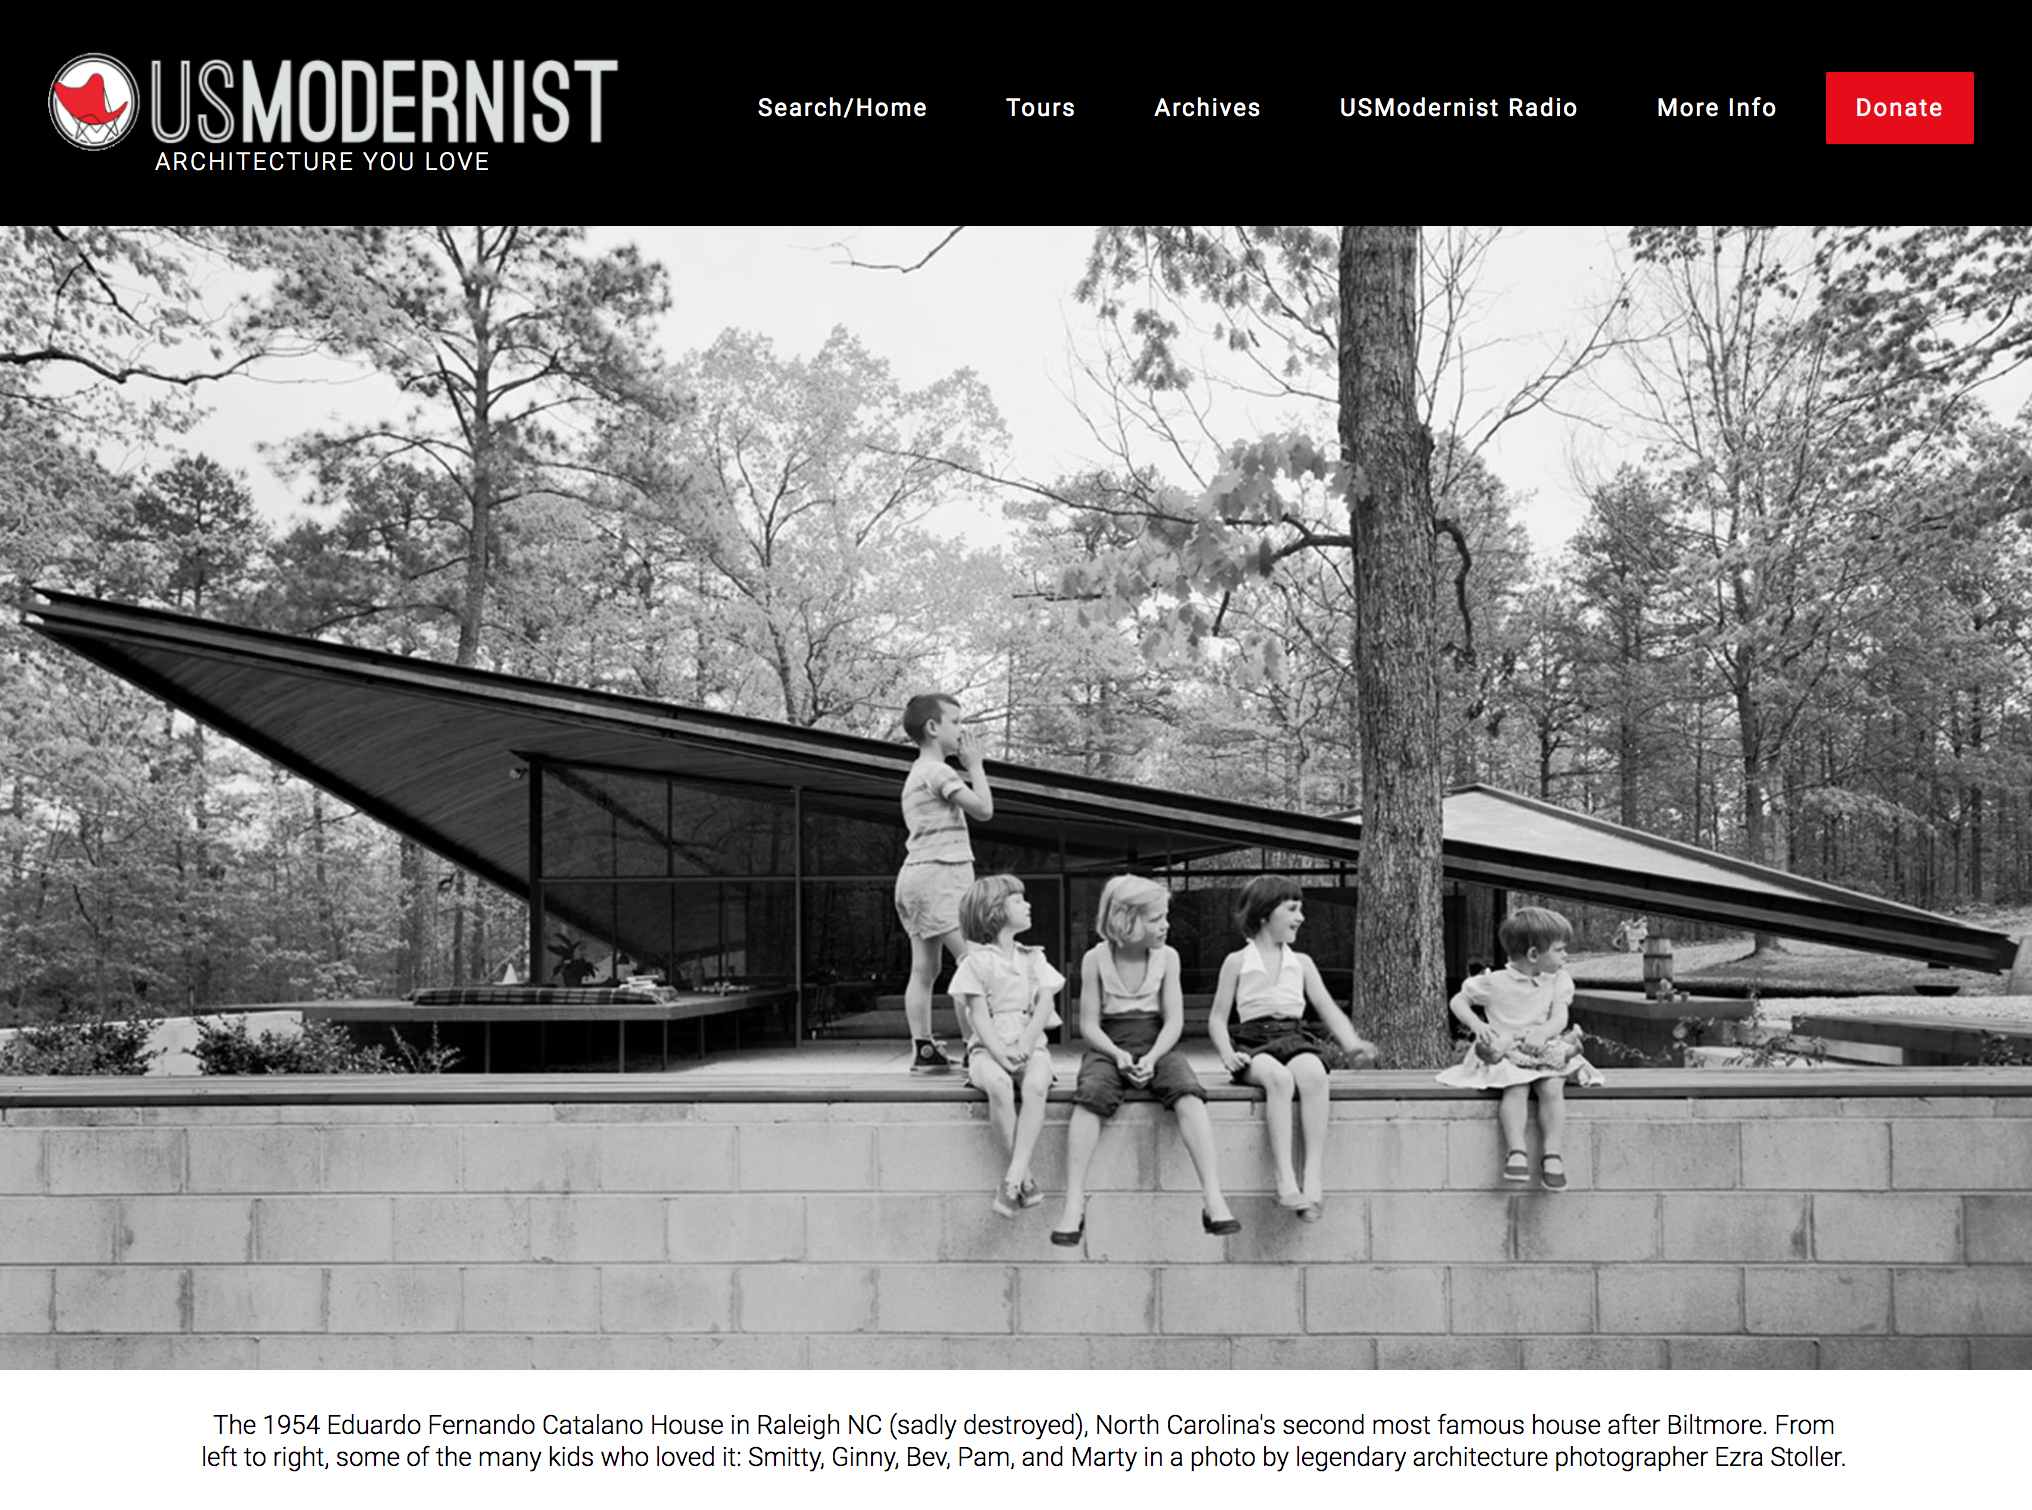 photo of usmodernist home page